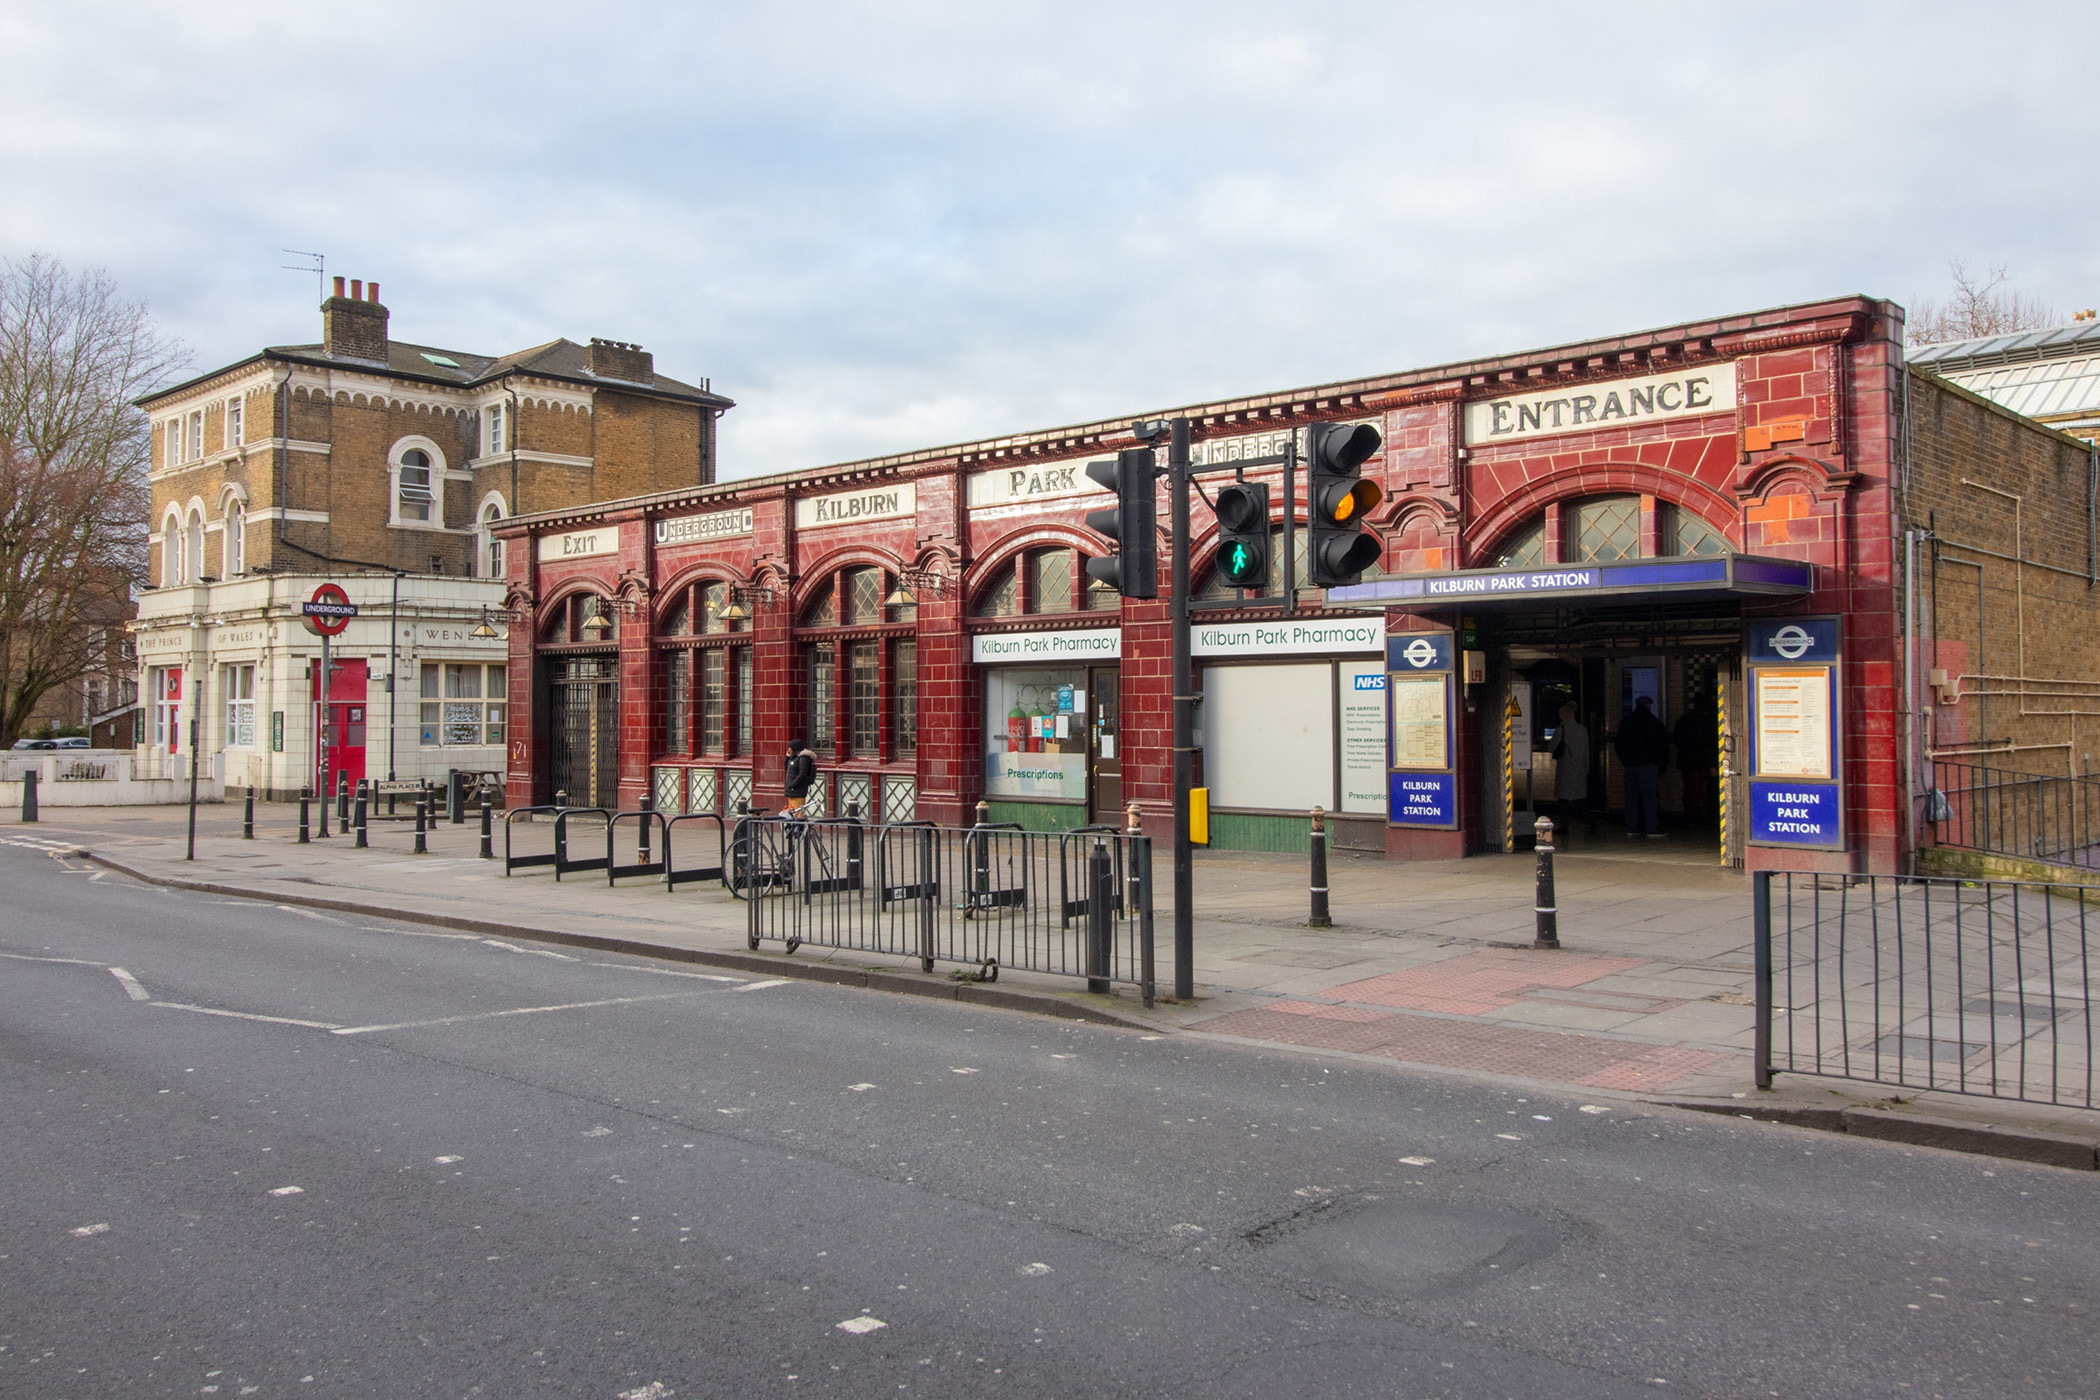 Red tiled tube station. Signs along the top of the building read (left to right):
Exit; Underground; Kilburn; Park; Underground; Entrance.